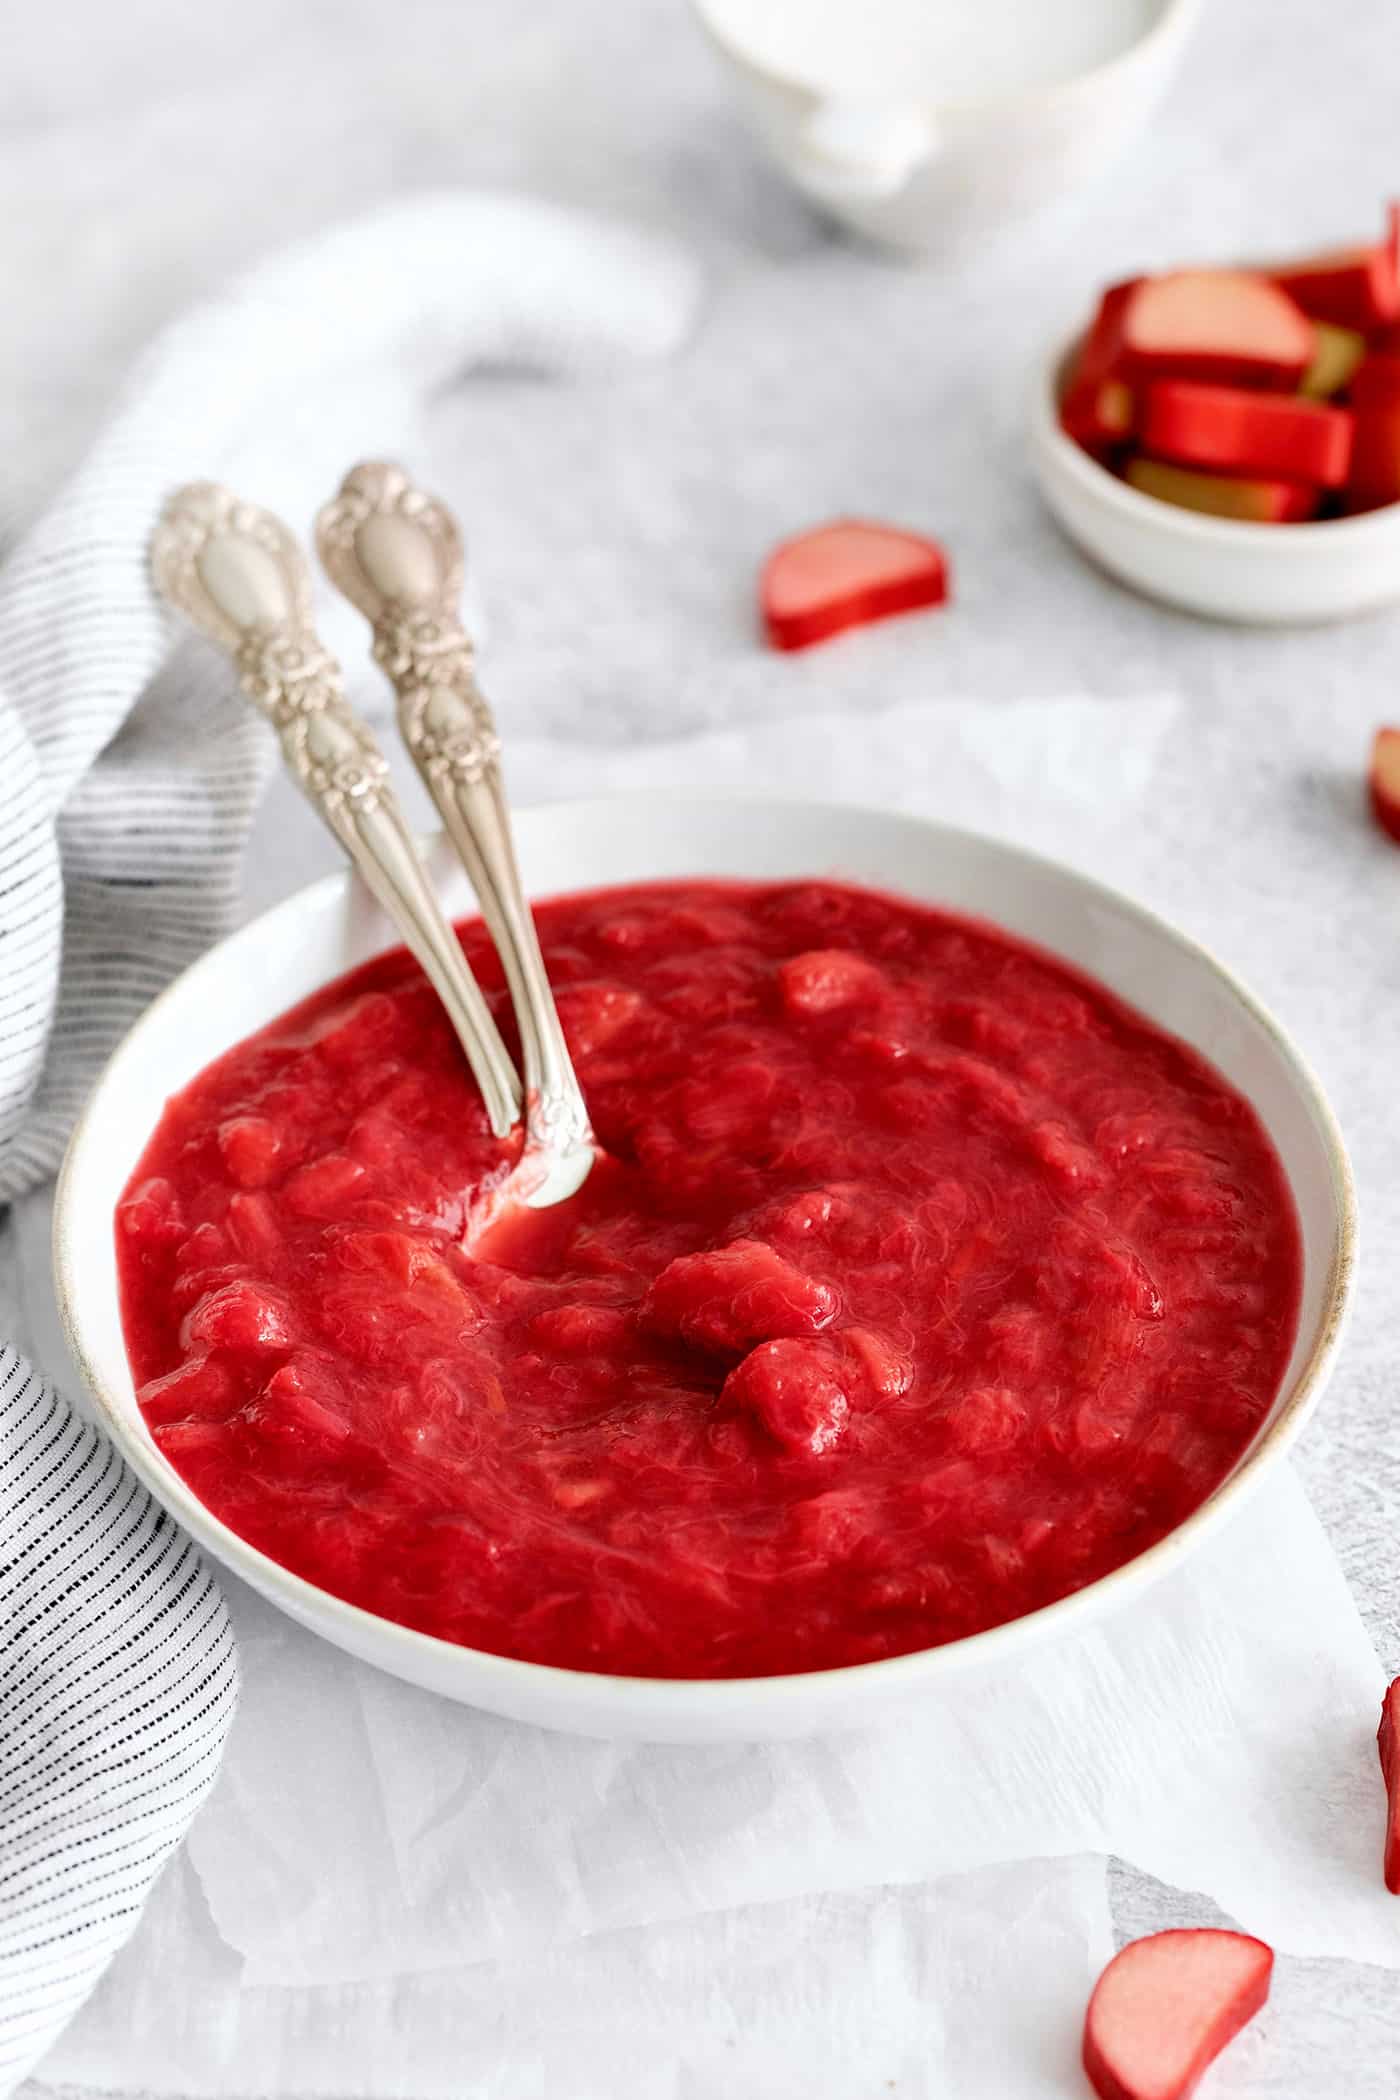 Two spoons in a bowl of rhubarb sauce